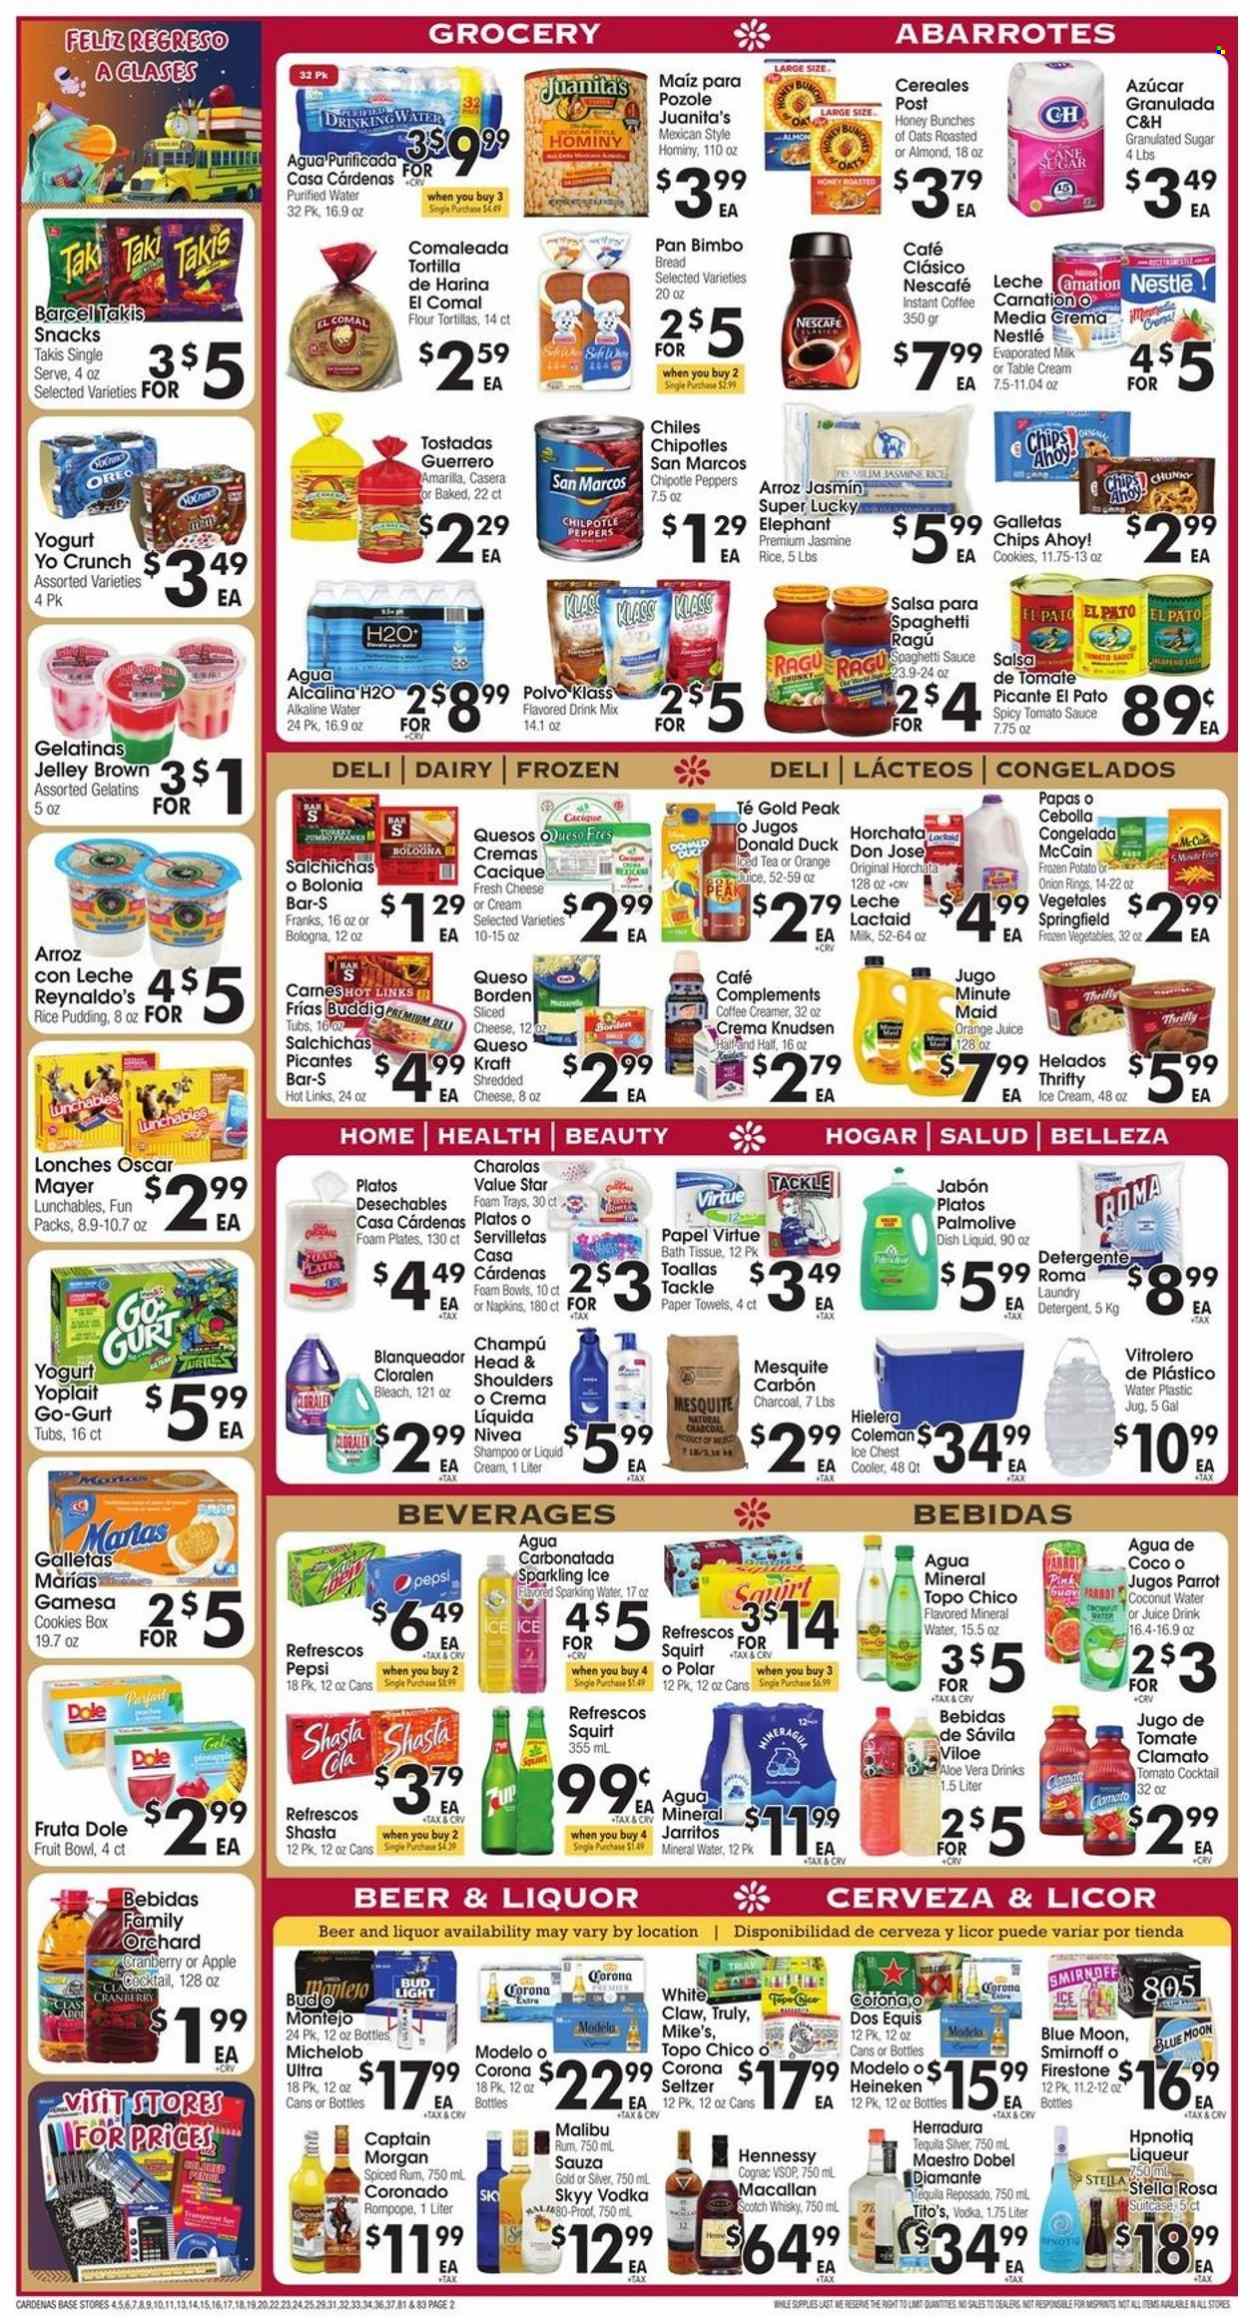 thumbnail - Cardenas Flyer - 08/10/2022 - 08/16/2022 - Sales products - bread, tortillas, tostadas, flour tortillas, Dole, peppers, pineapple, spaghetti, onion rings, sauce, Lunchables, Kraft®, spaghetti sauce, bologna sausage, Lactaid, shredded cheese, sliced cheese, Oreo, yoghurt, Yoplait, rice pudding, evaporated milk, creamer, ice cream, frozen vegetables, McCain, cookies, Nestlé, snack, Chips Ahoy!, granulated sugar, sugar, tomato sauce, jasmine rice, salsa, ragu, Pepsi, orange juice, juice, ice tea, Clamato, coconut water, fruit punch, mineral water, seltzer water, sparkling water, purified water, alkaline water, instant coffee, Nescafé, Captain Morgan, cognac, liqueur, rum, Smirnoff, spiced rum, tequila, vodka, Hennessy, liquor, SKYY, Malibu, White Claw, TRULY, scotch whisky, whisky, beer, Bud Light, Corona Extra, Heineken, Modelo, napkins, bath tissue, kitchen towels, paper towels, detergent, bleach, dishwashing liquid, shampoo, Nivea, Palmolive, plate, pan, bowl, foam plates, Dos Equis, Blue Moon, Michelob. Page 2.